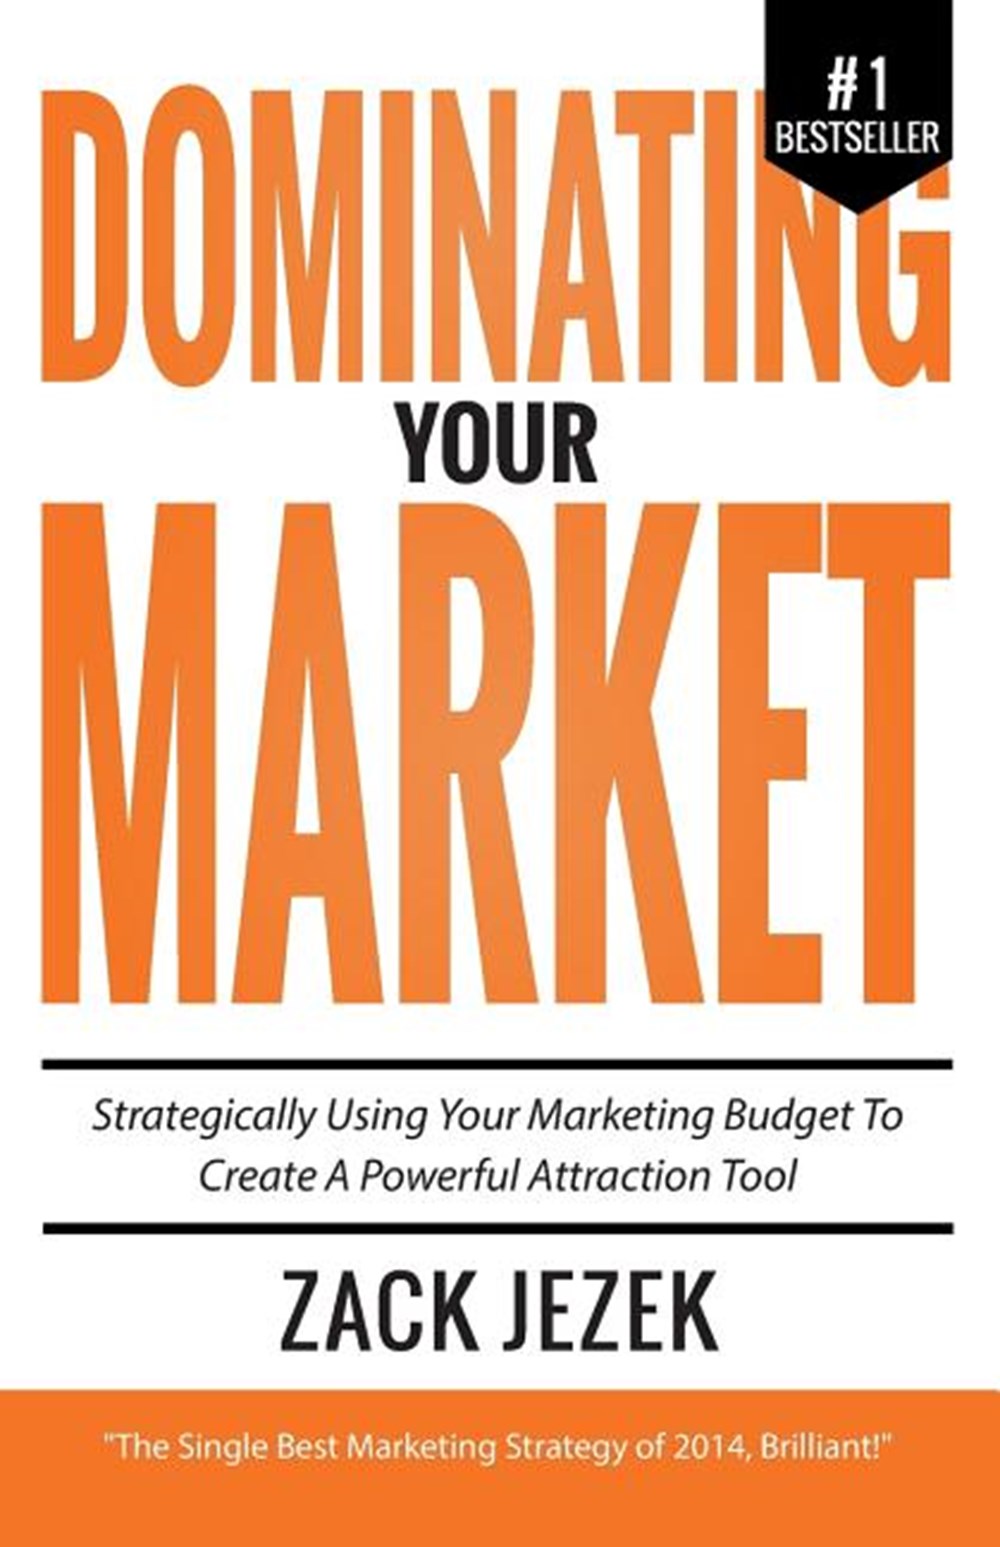 Dominating Your Market Strategically Using Your Marketing Budget to Create a Powerful Attraction Too